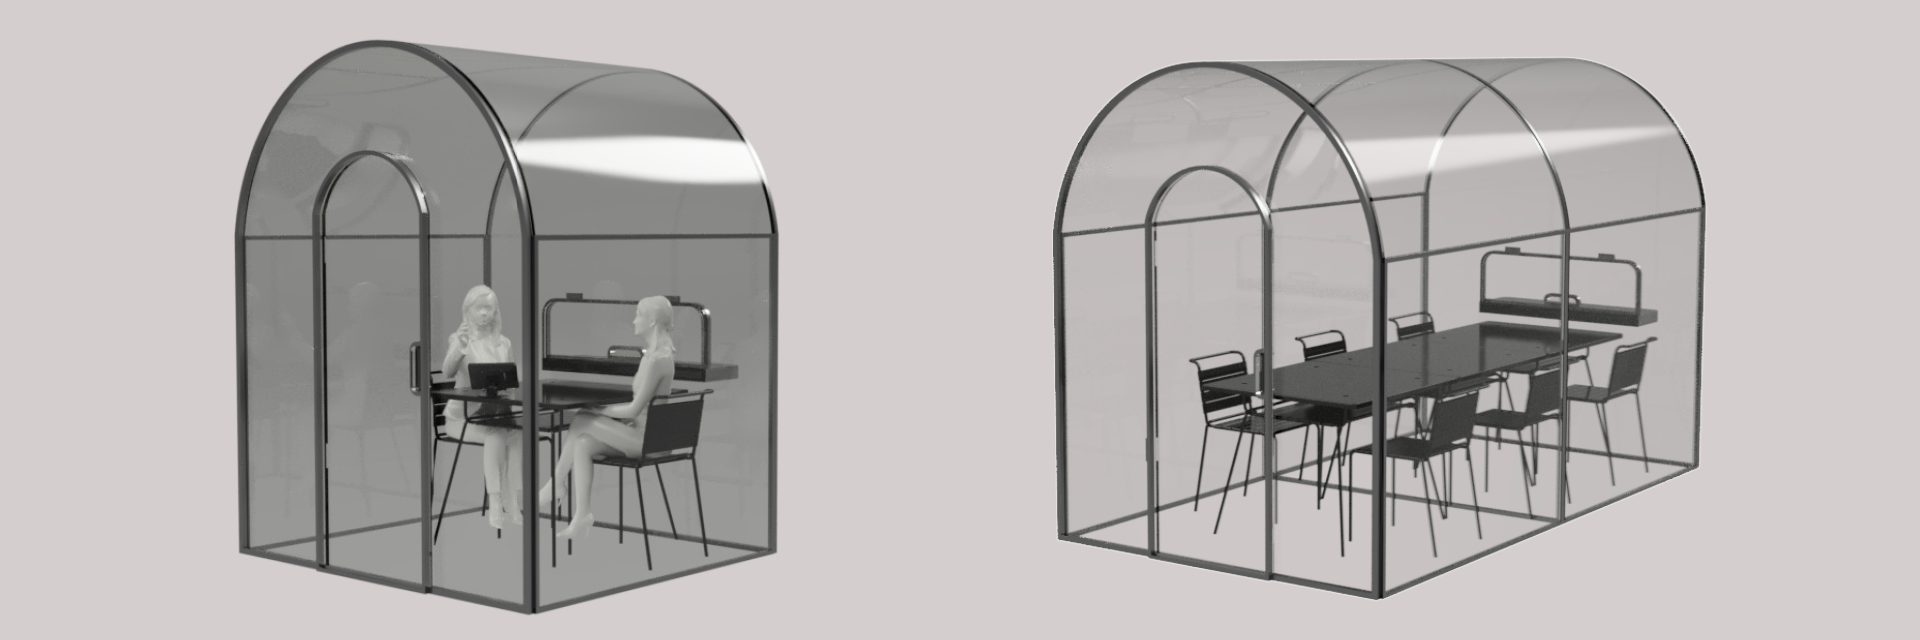 Renders of a restaurant pod device